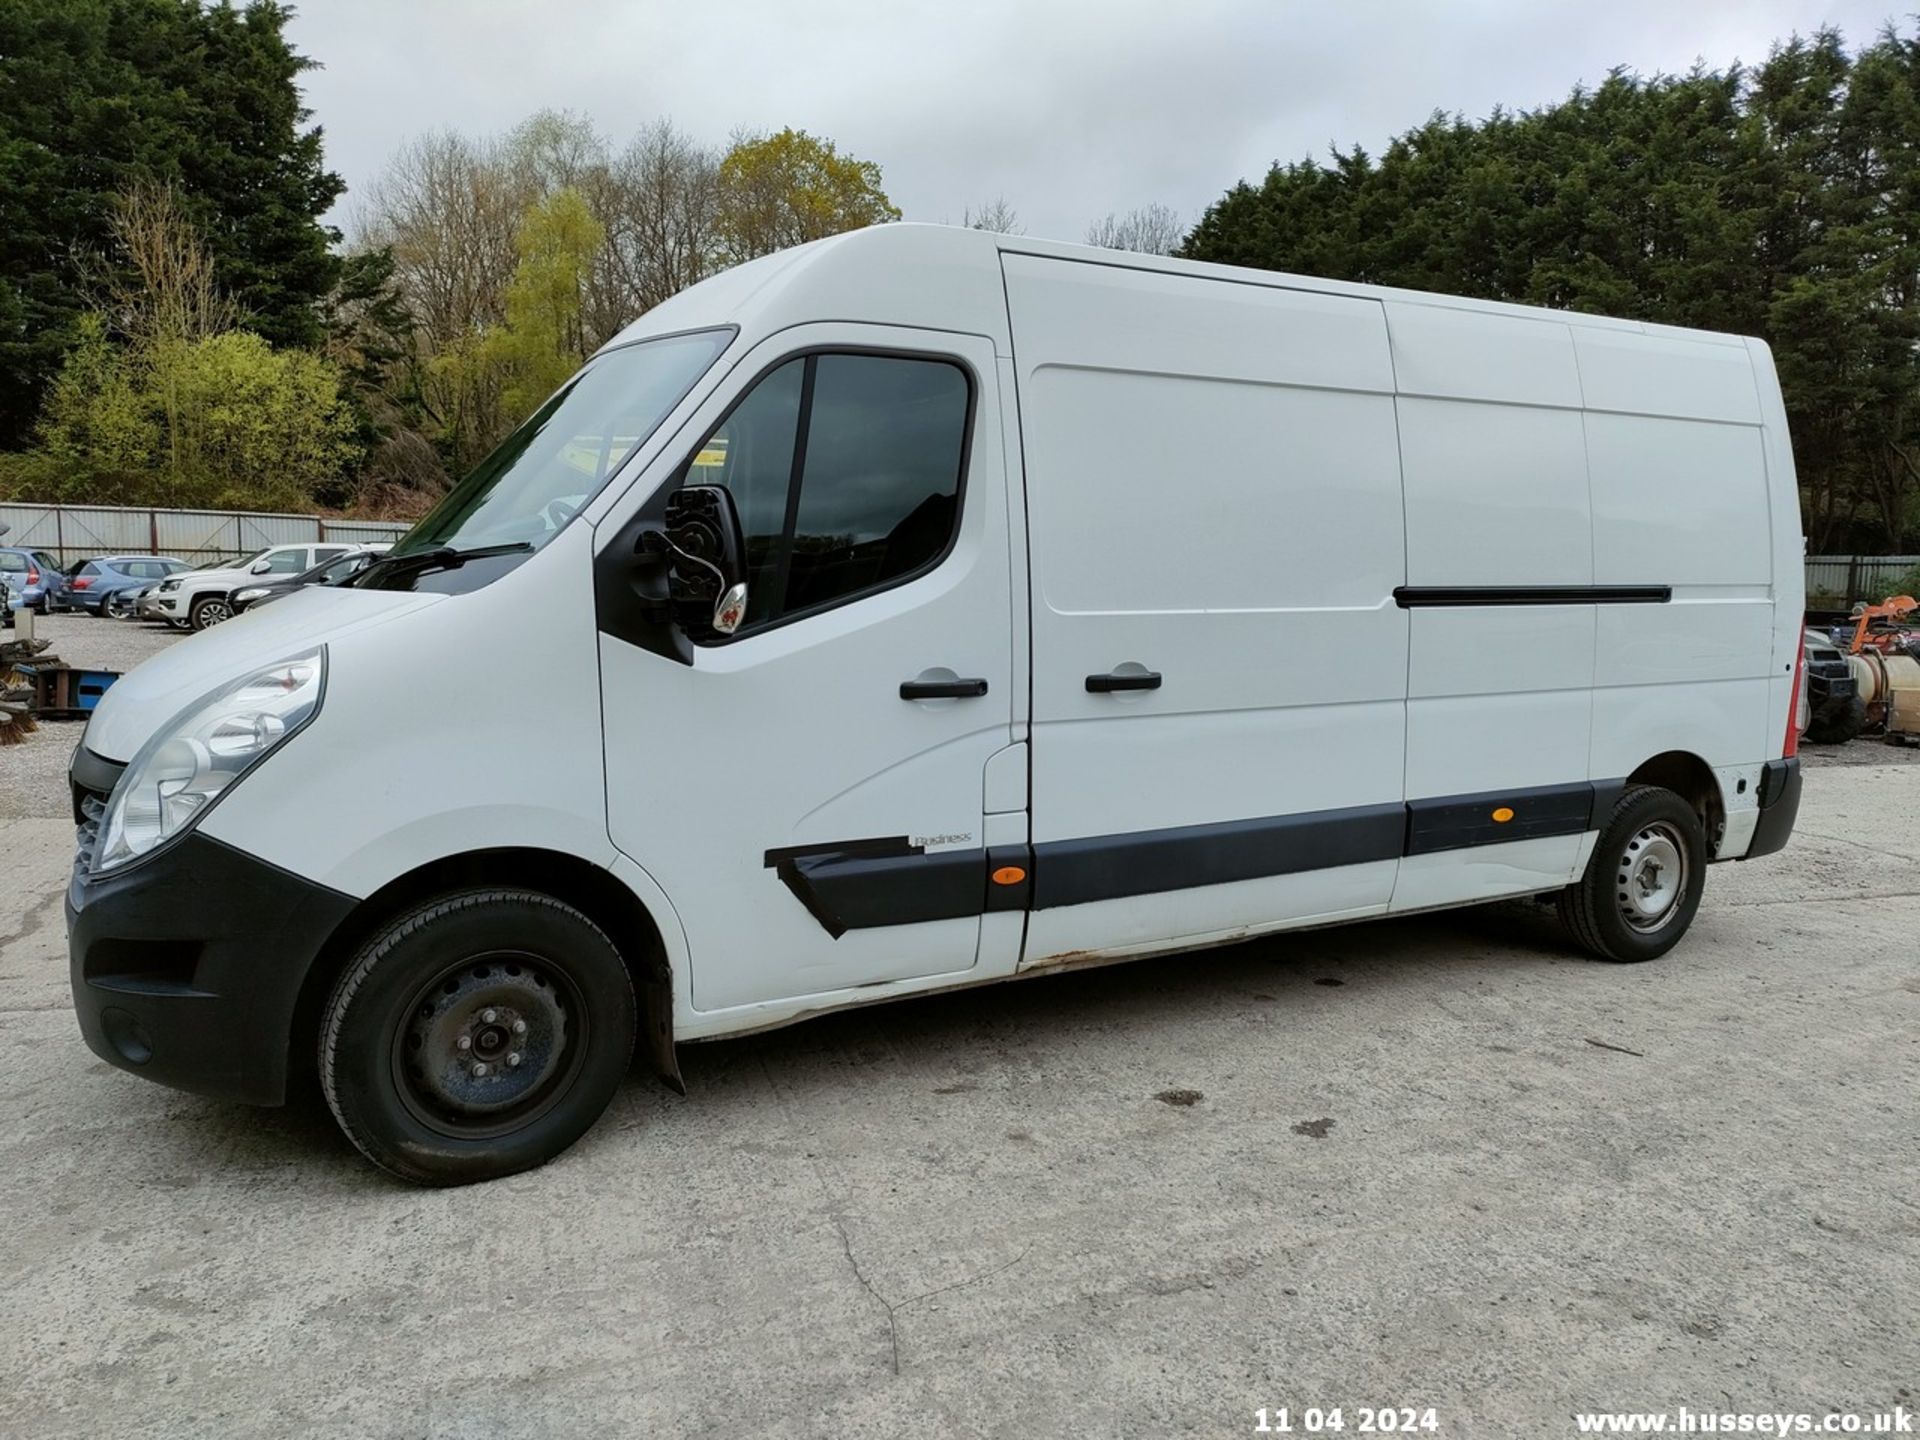 18/68 RENAULT MASTER LM35 BUSINESS DCI - 2298cc 5dr Van (White) - Image 18 of 68